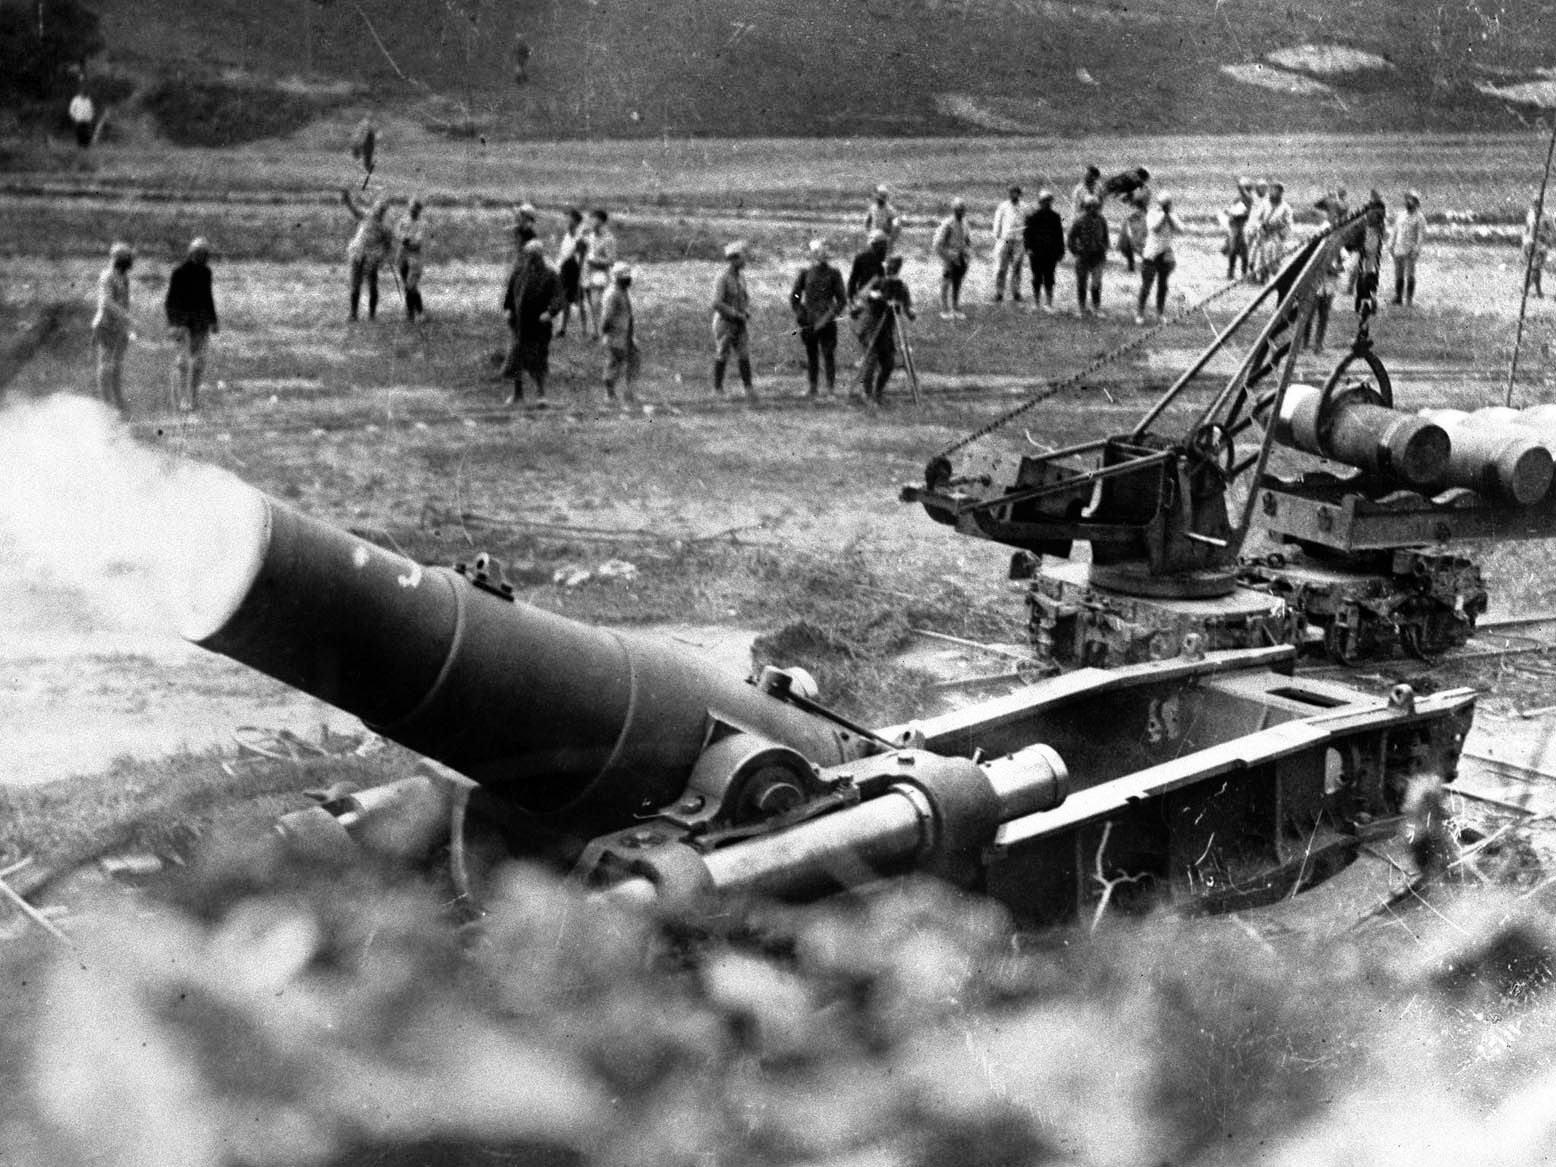 French troops used 370mm Filloux mortars to pound the German defenses of Fort Douaumont for the final assault carried out by three infantry divisions.